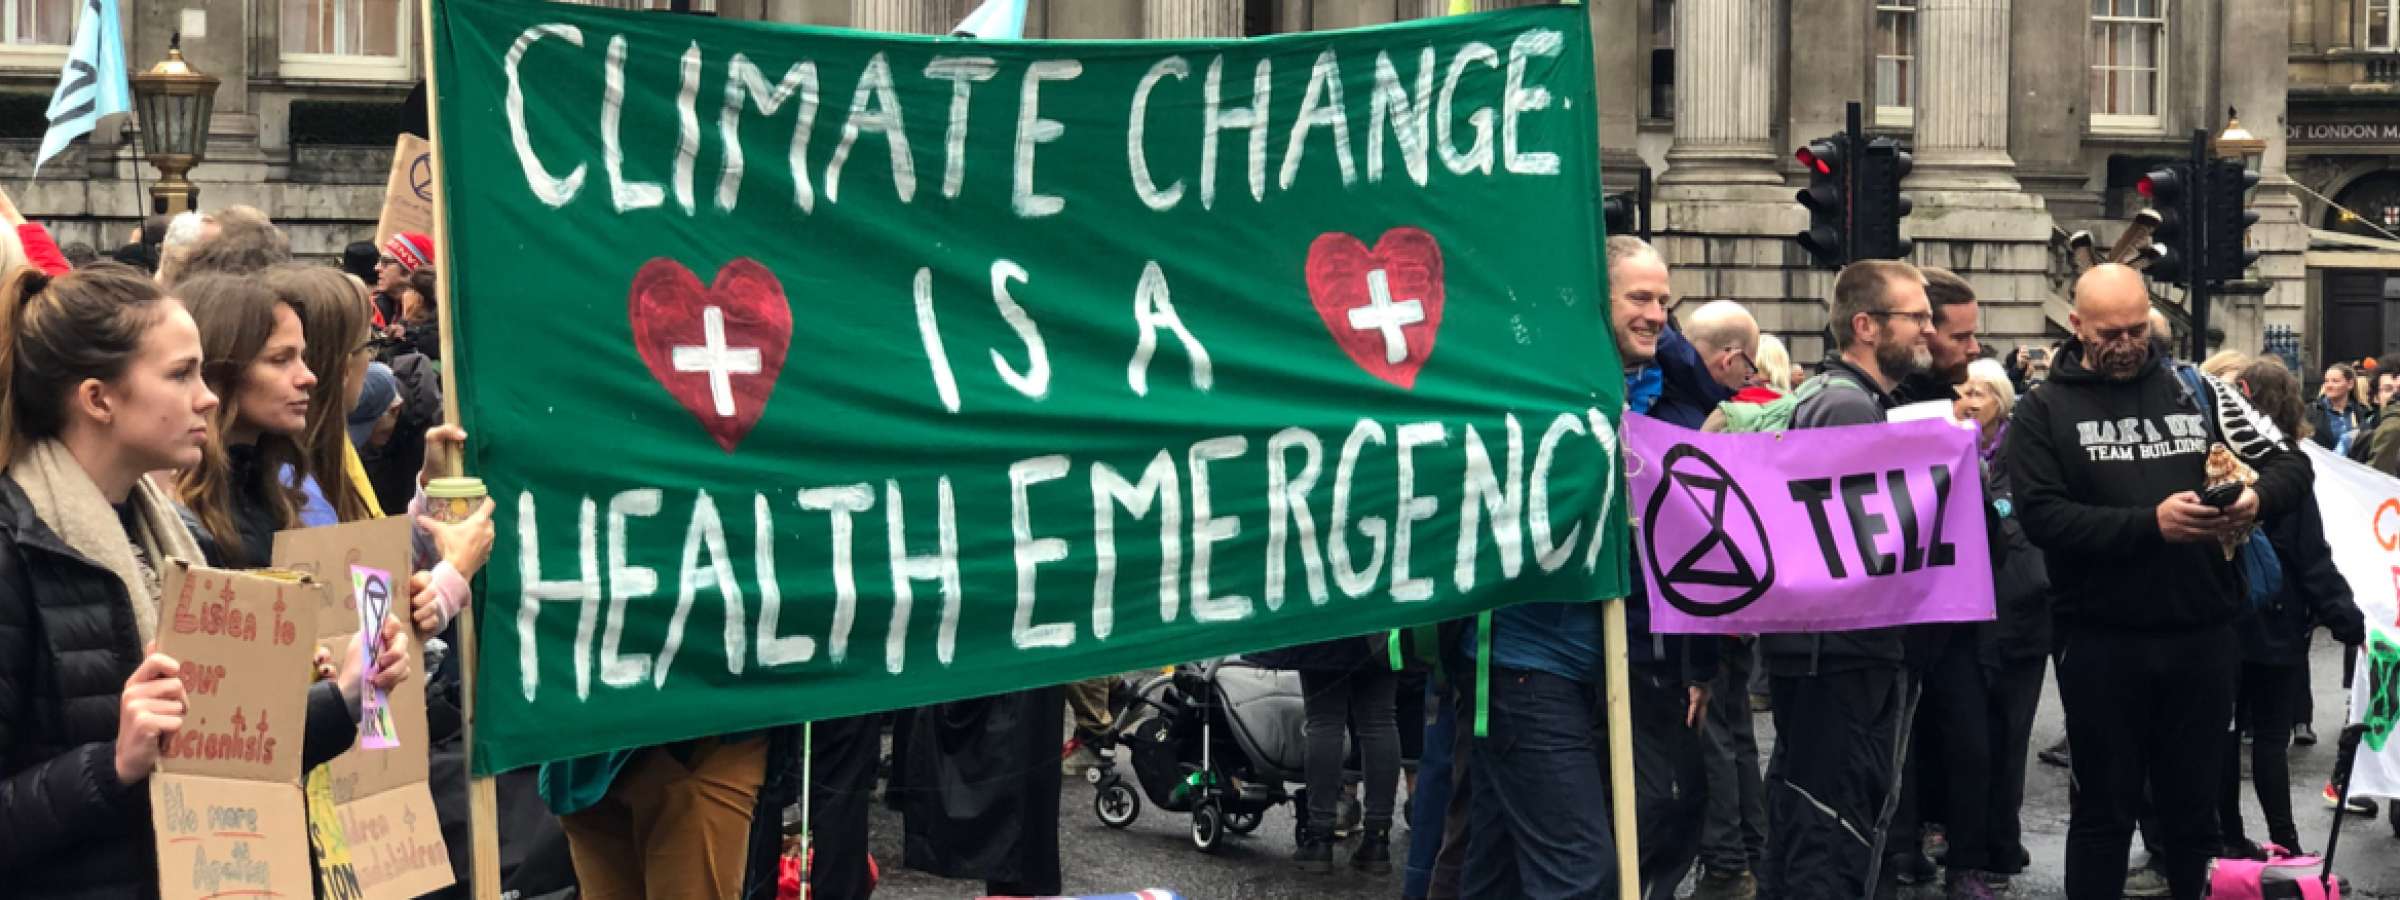 This image shows a group of people demonstrating. They are holding a large green banner that says" Climate change is a health emergency".